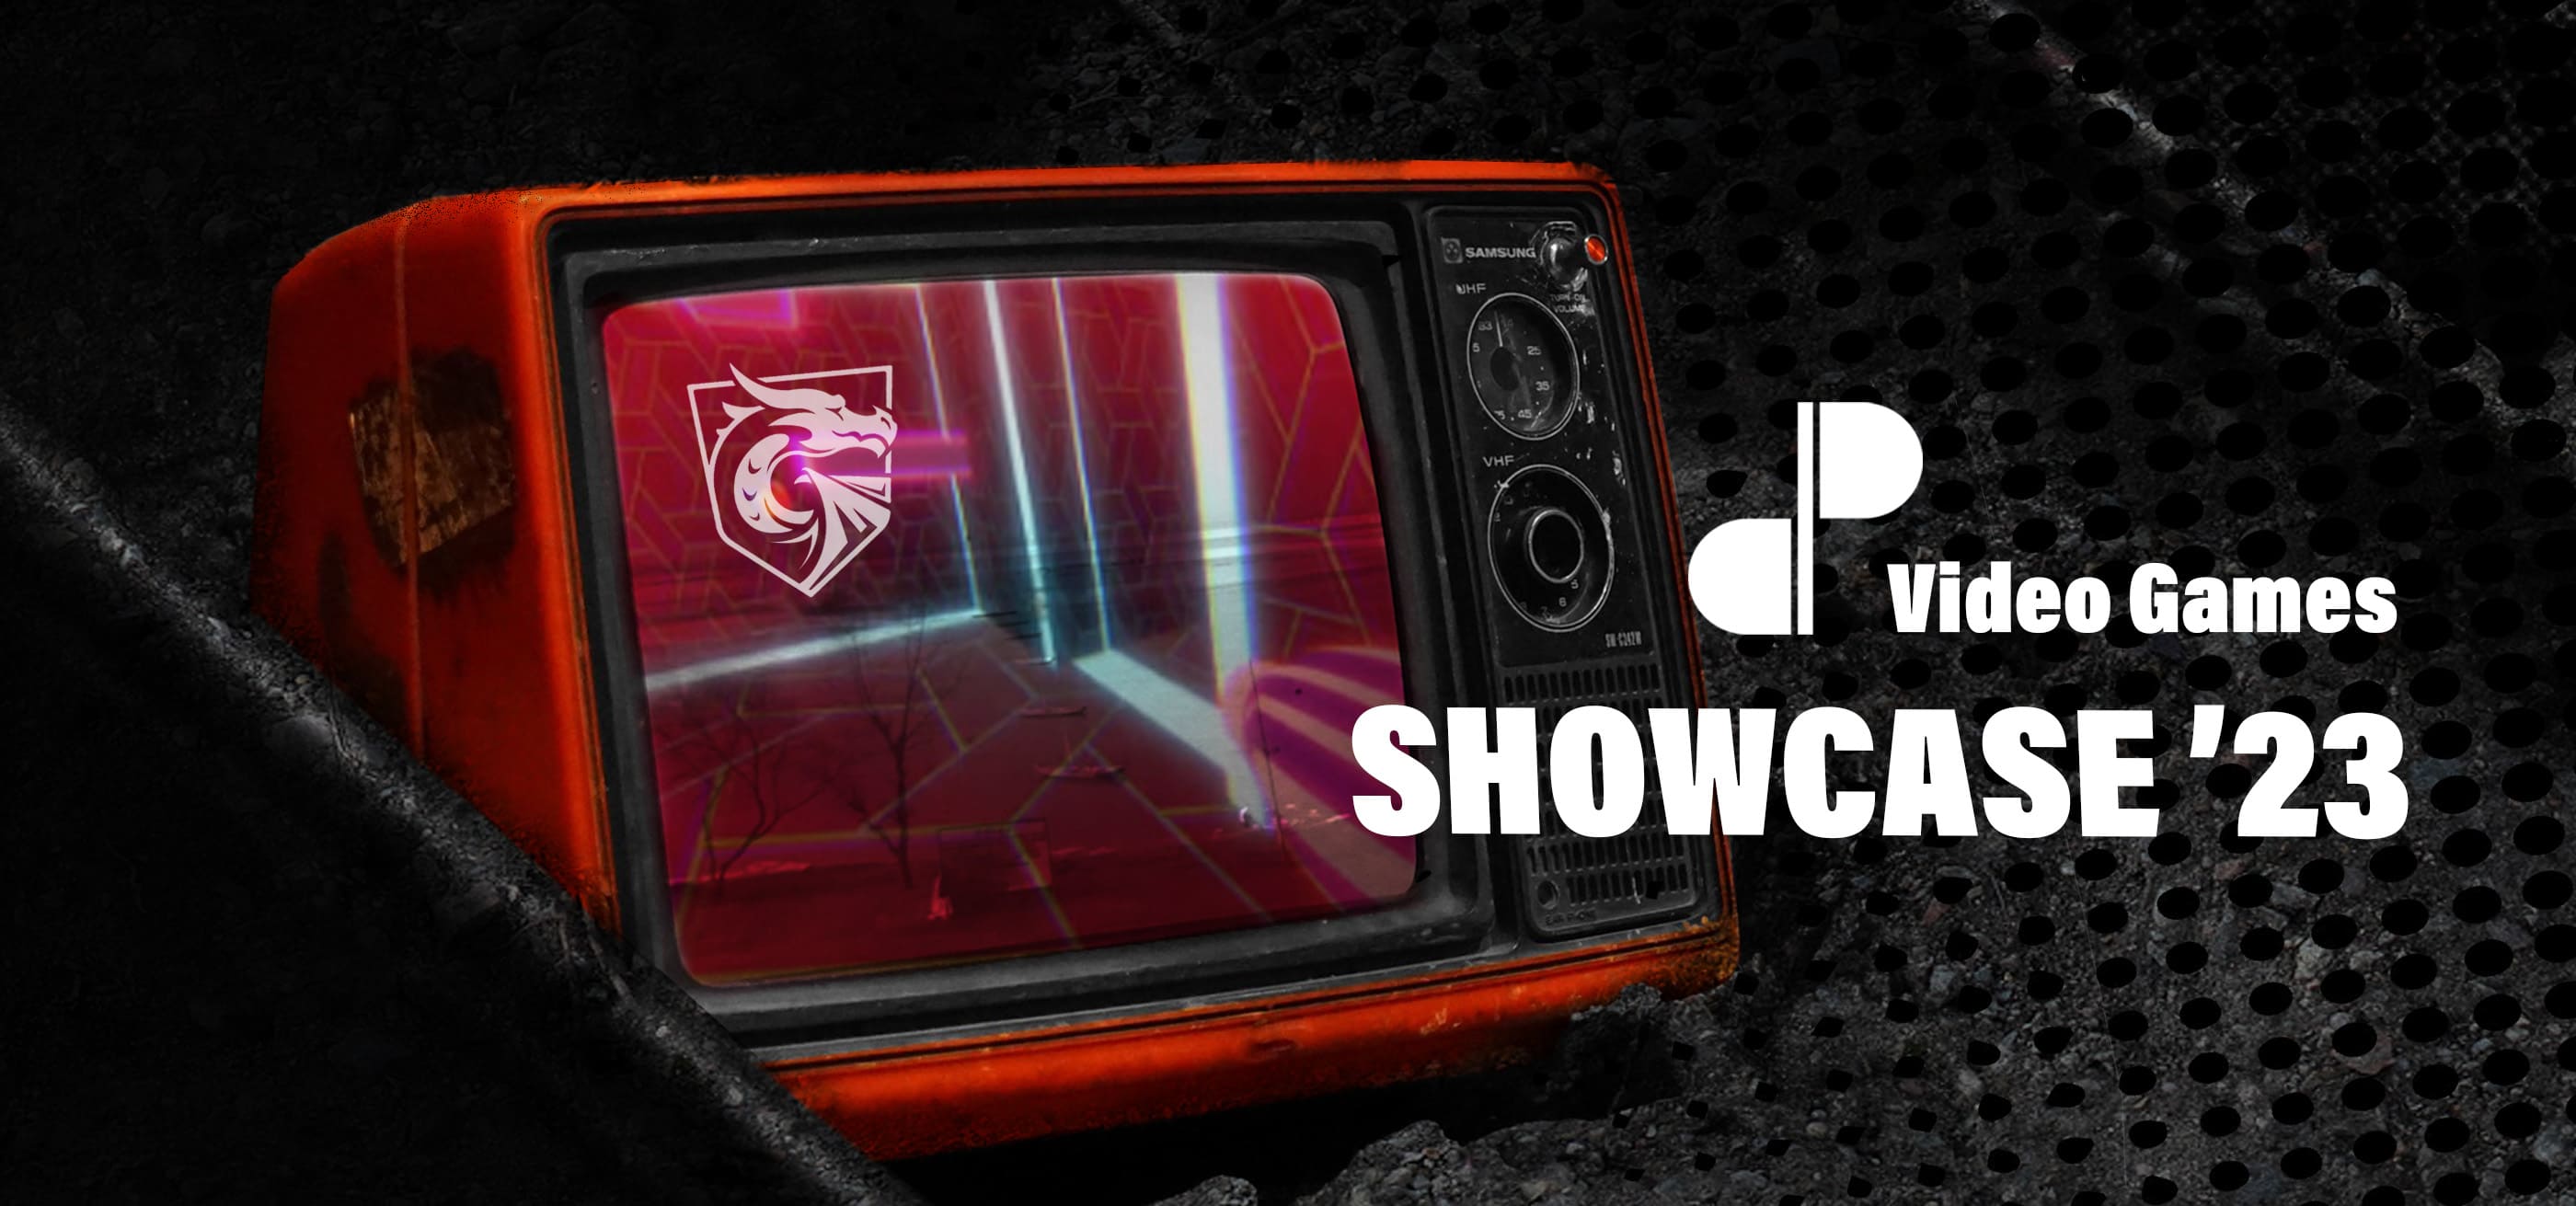 A Banner composed of the image of an old red television displaying a futuristic video game image with the Dragons shield of DigiPen, and a text that says: Video Games Showcase 2023